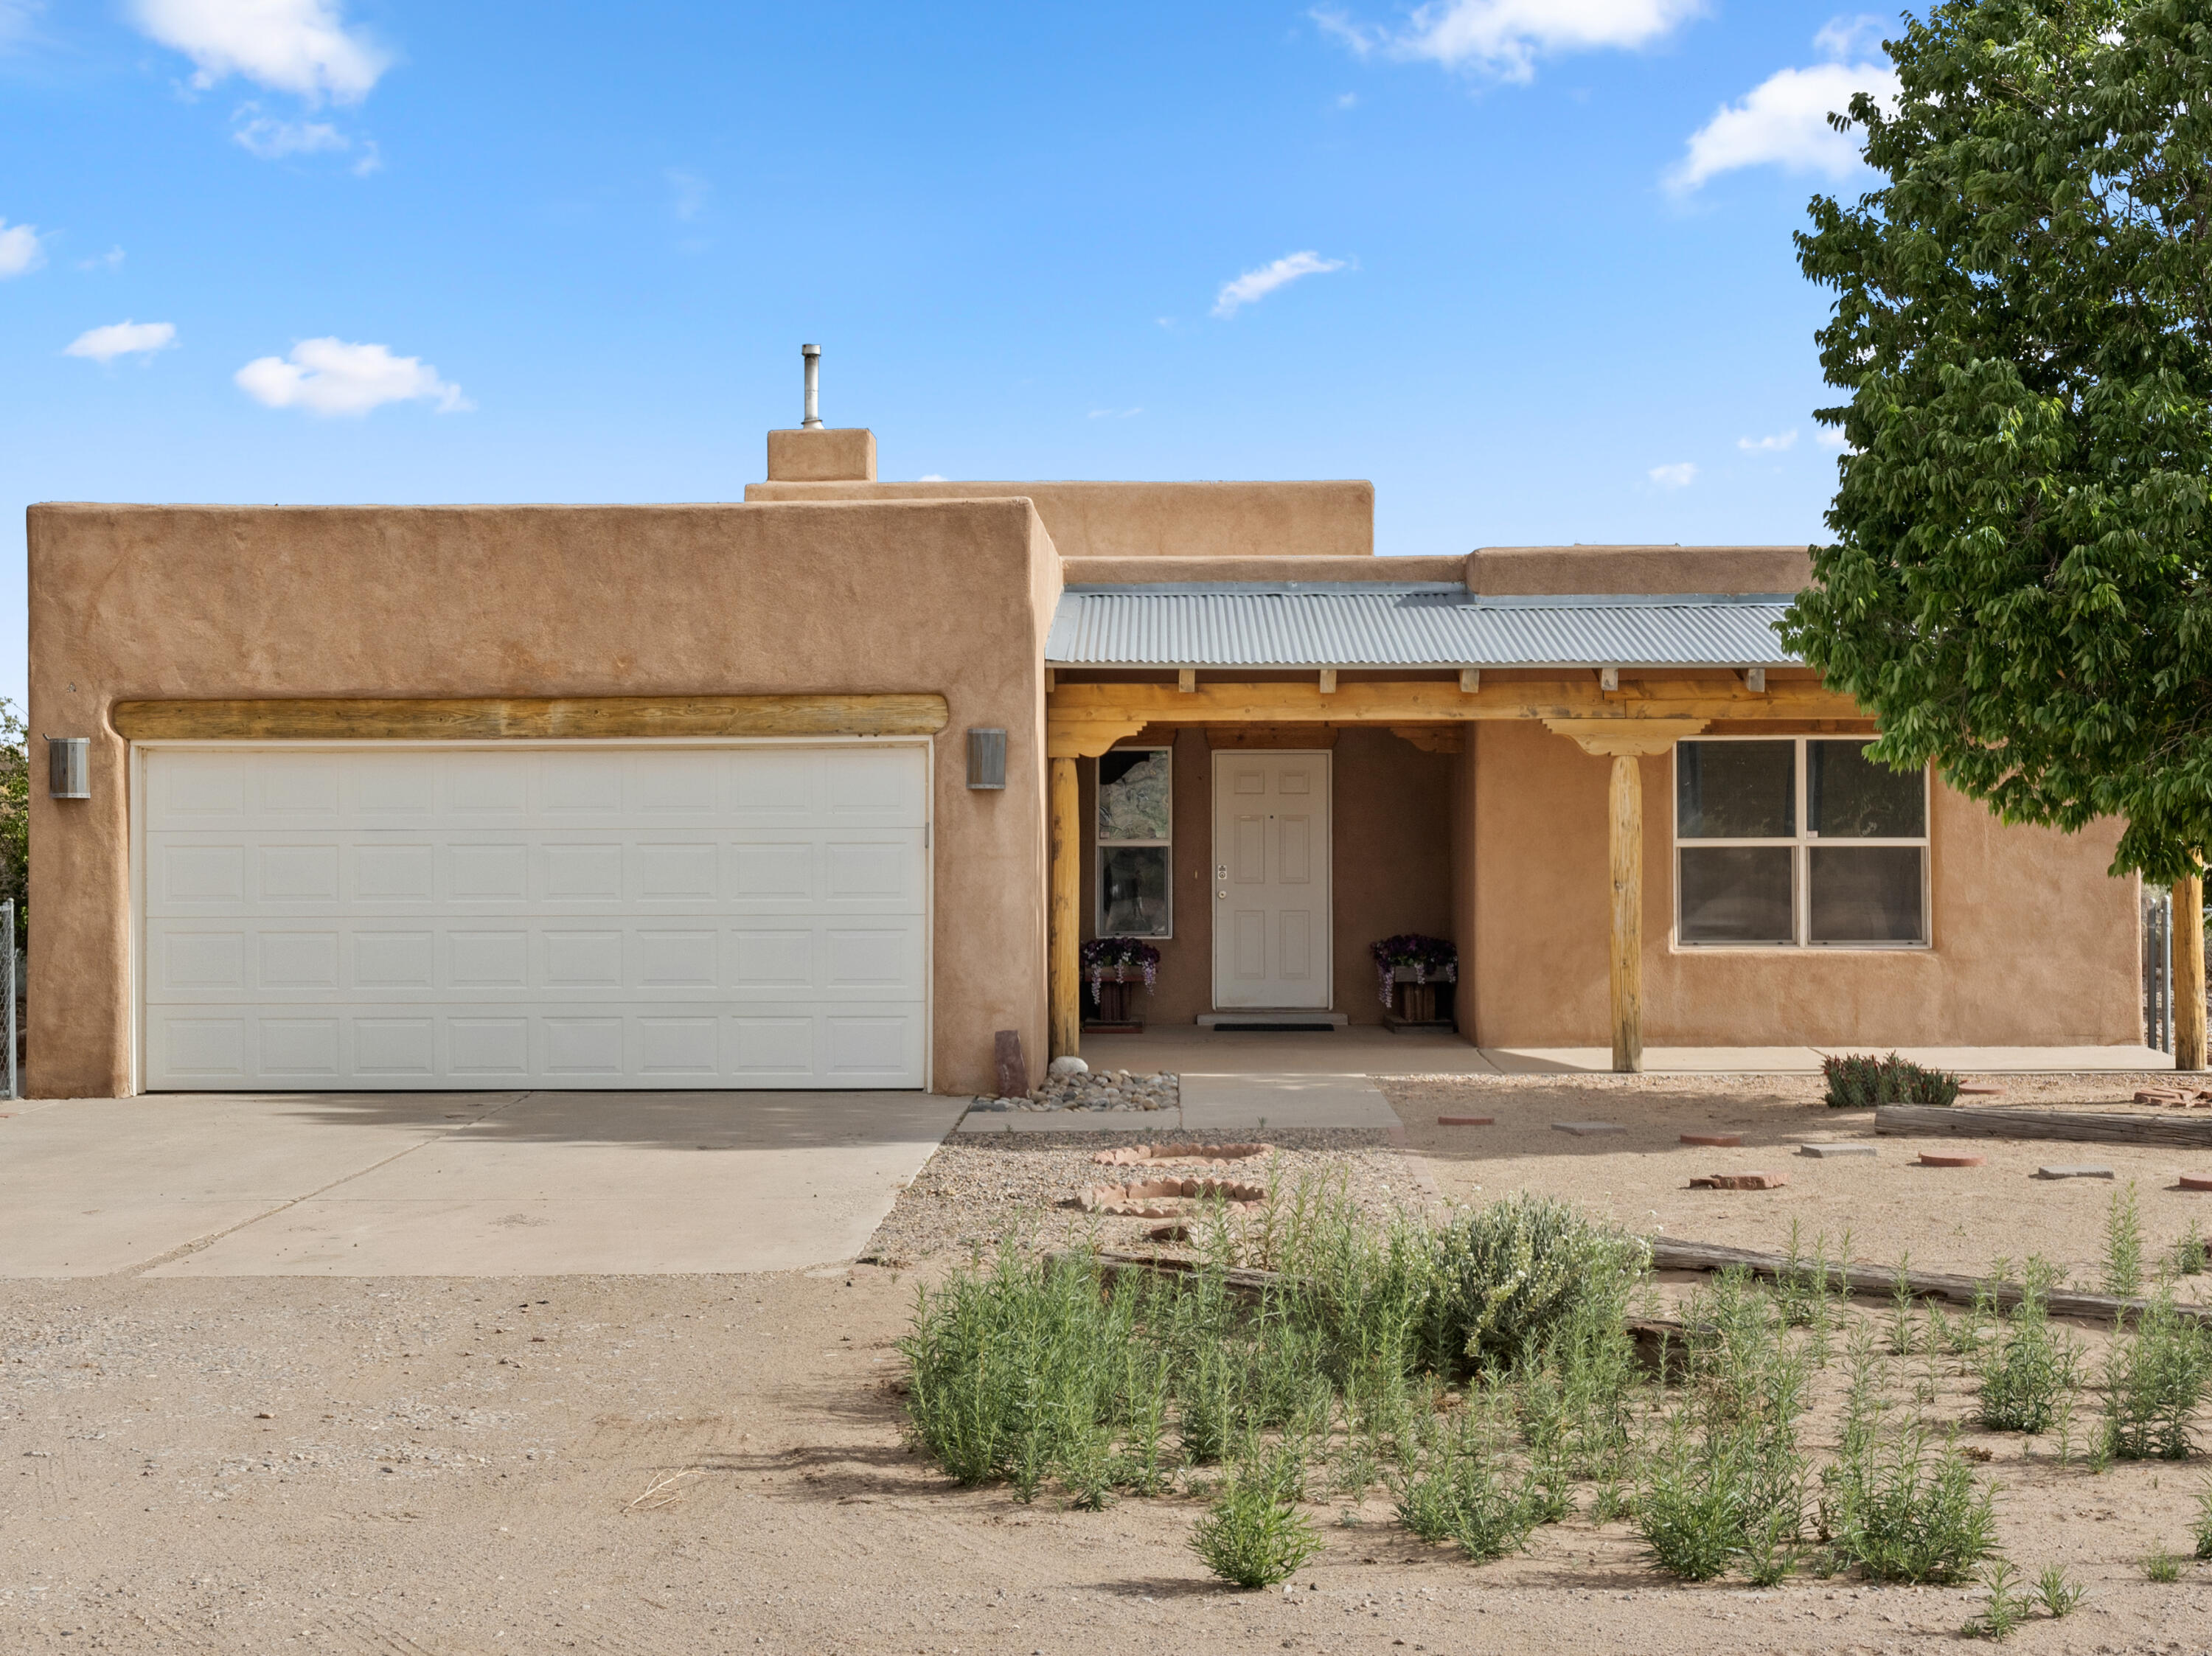 Custom Home on 1/2 AC lot.  This hidden Gem Awaits!  This 1600 S.F. 3 Bedroom 2 Bath Home is Custom Throughout.  It's Viga Ceilings and Kiva Fireplace create the perfect southwest  feeling yo9ur clients will love.Come and see this one while it's still available.